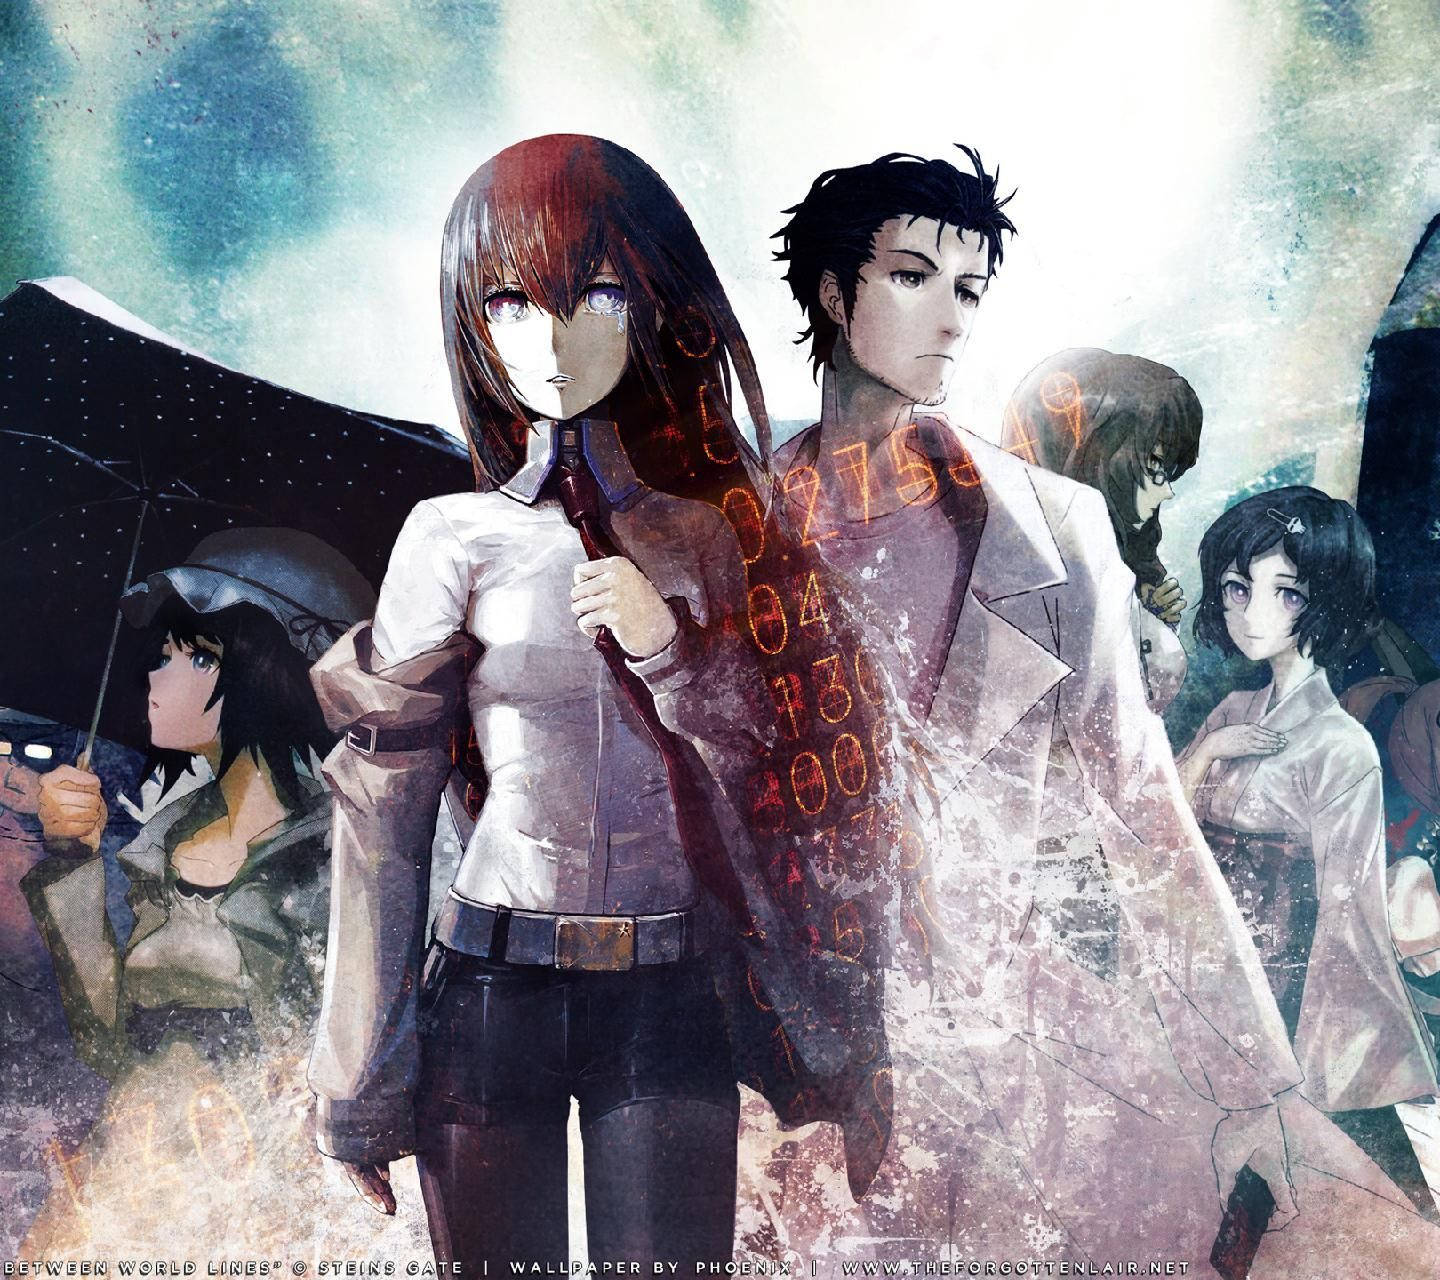 Unlock the mysteries of time with Steins Gate Wallpaper